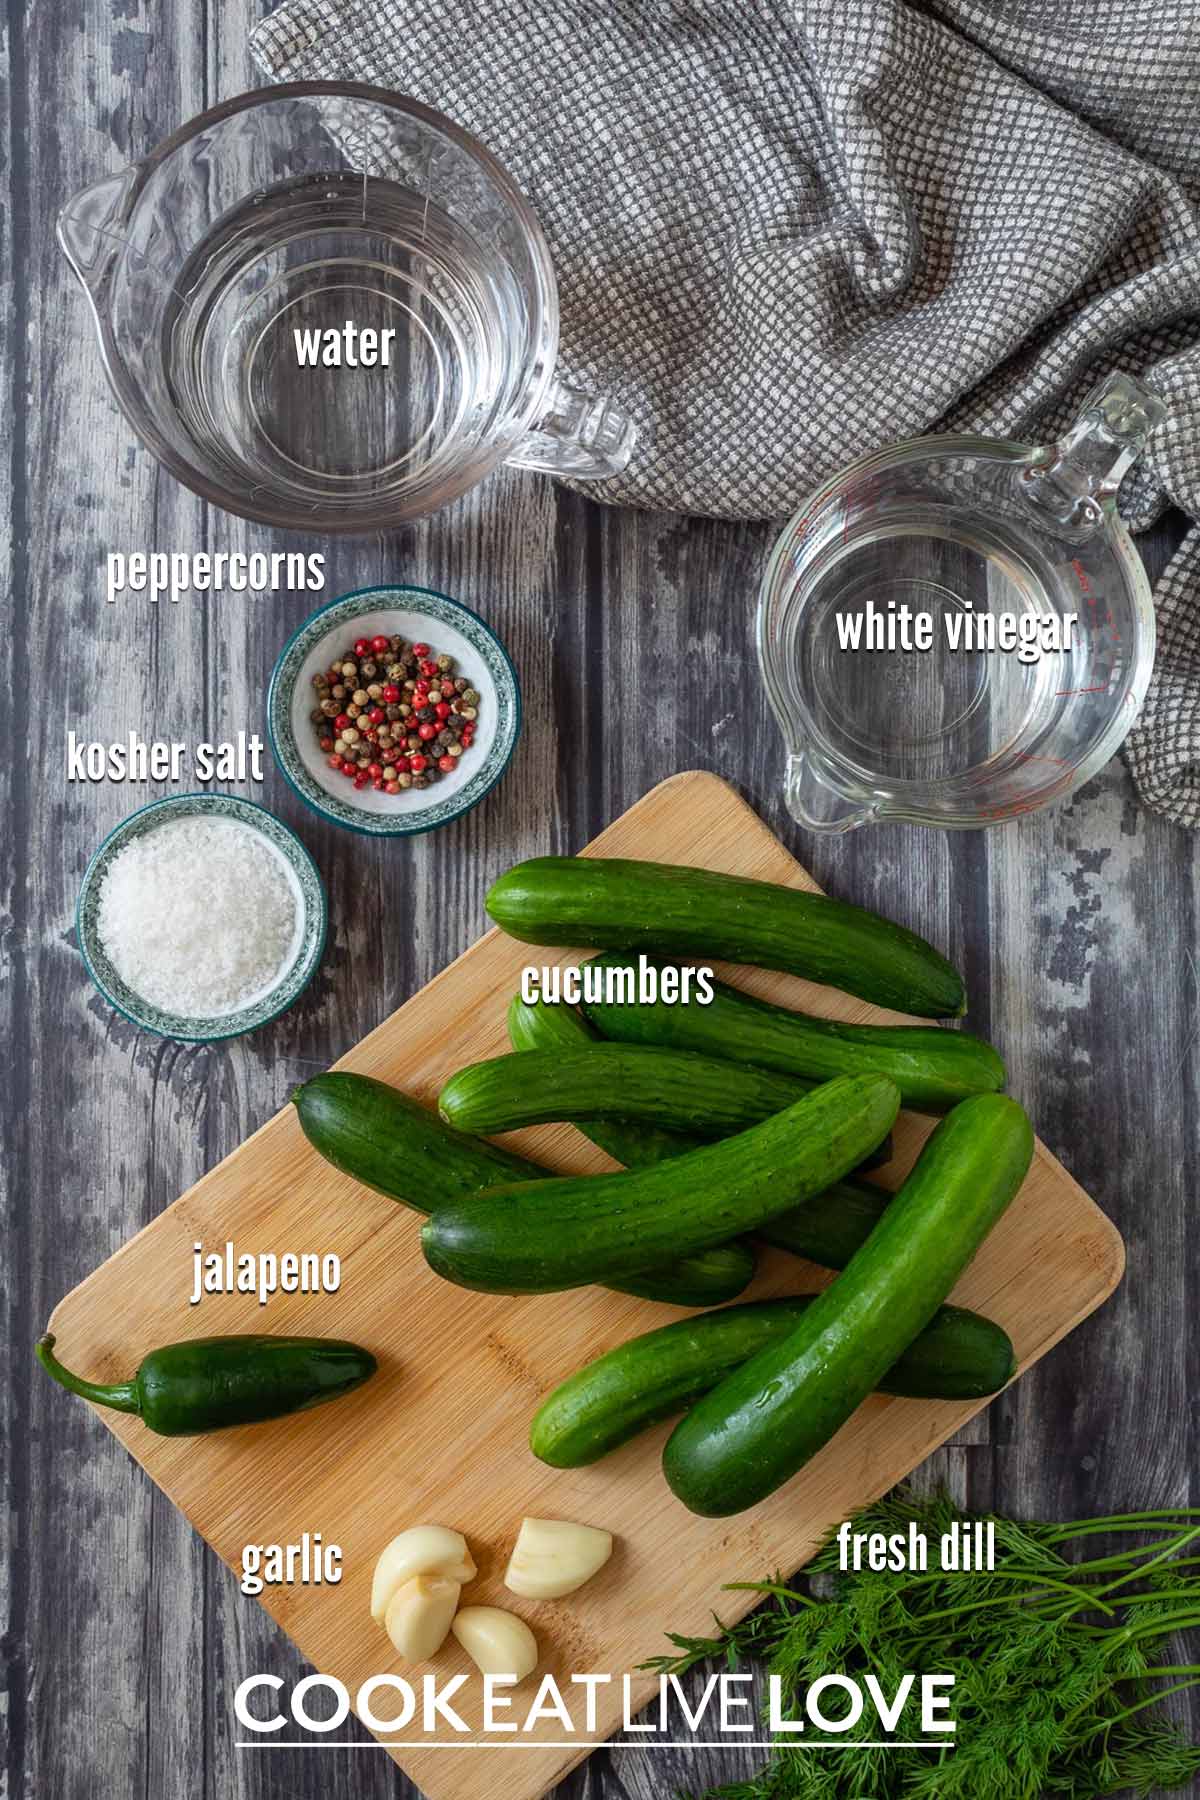 Ingredients to make a small batch of refrigerator dill pickles on the table with text labels.